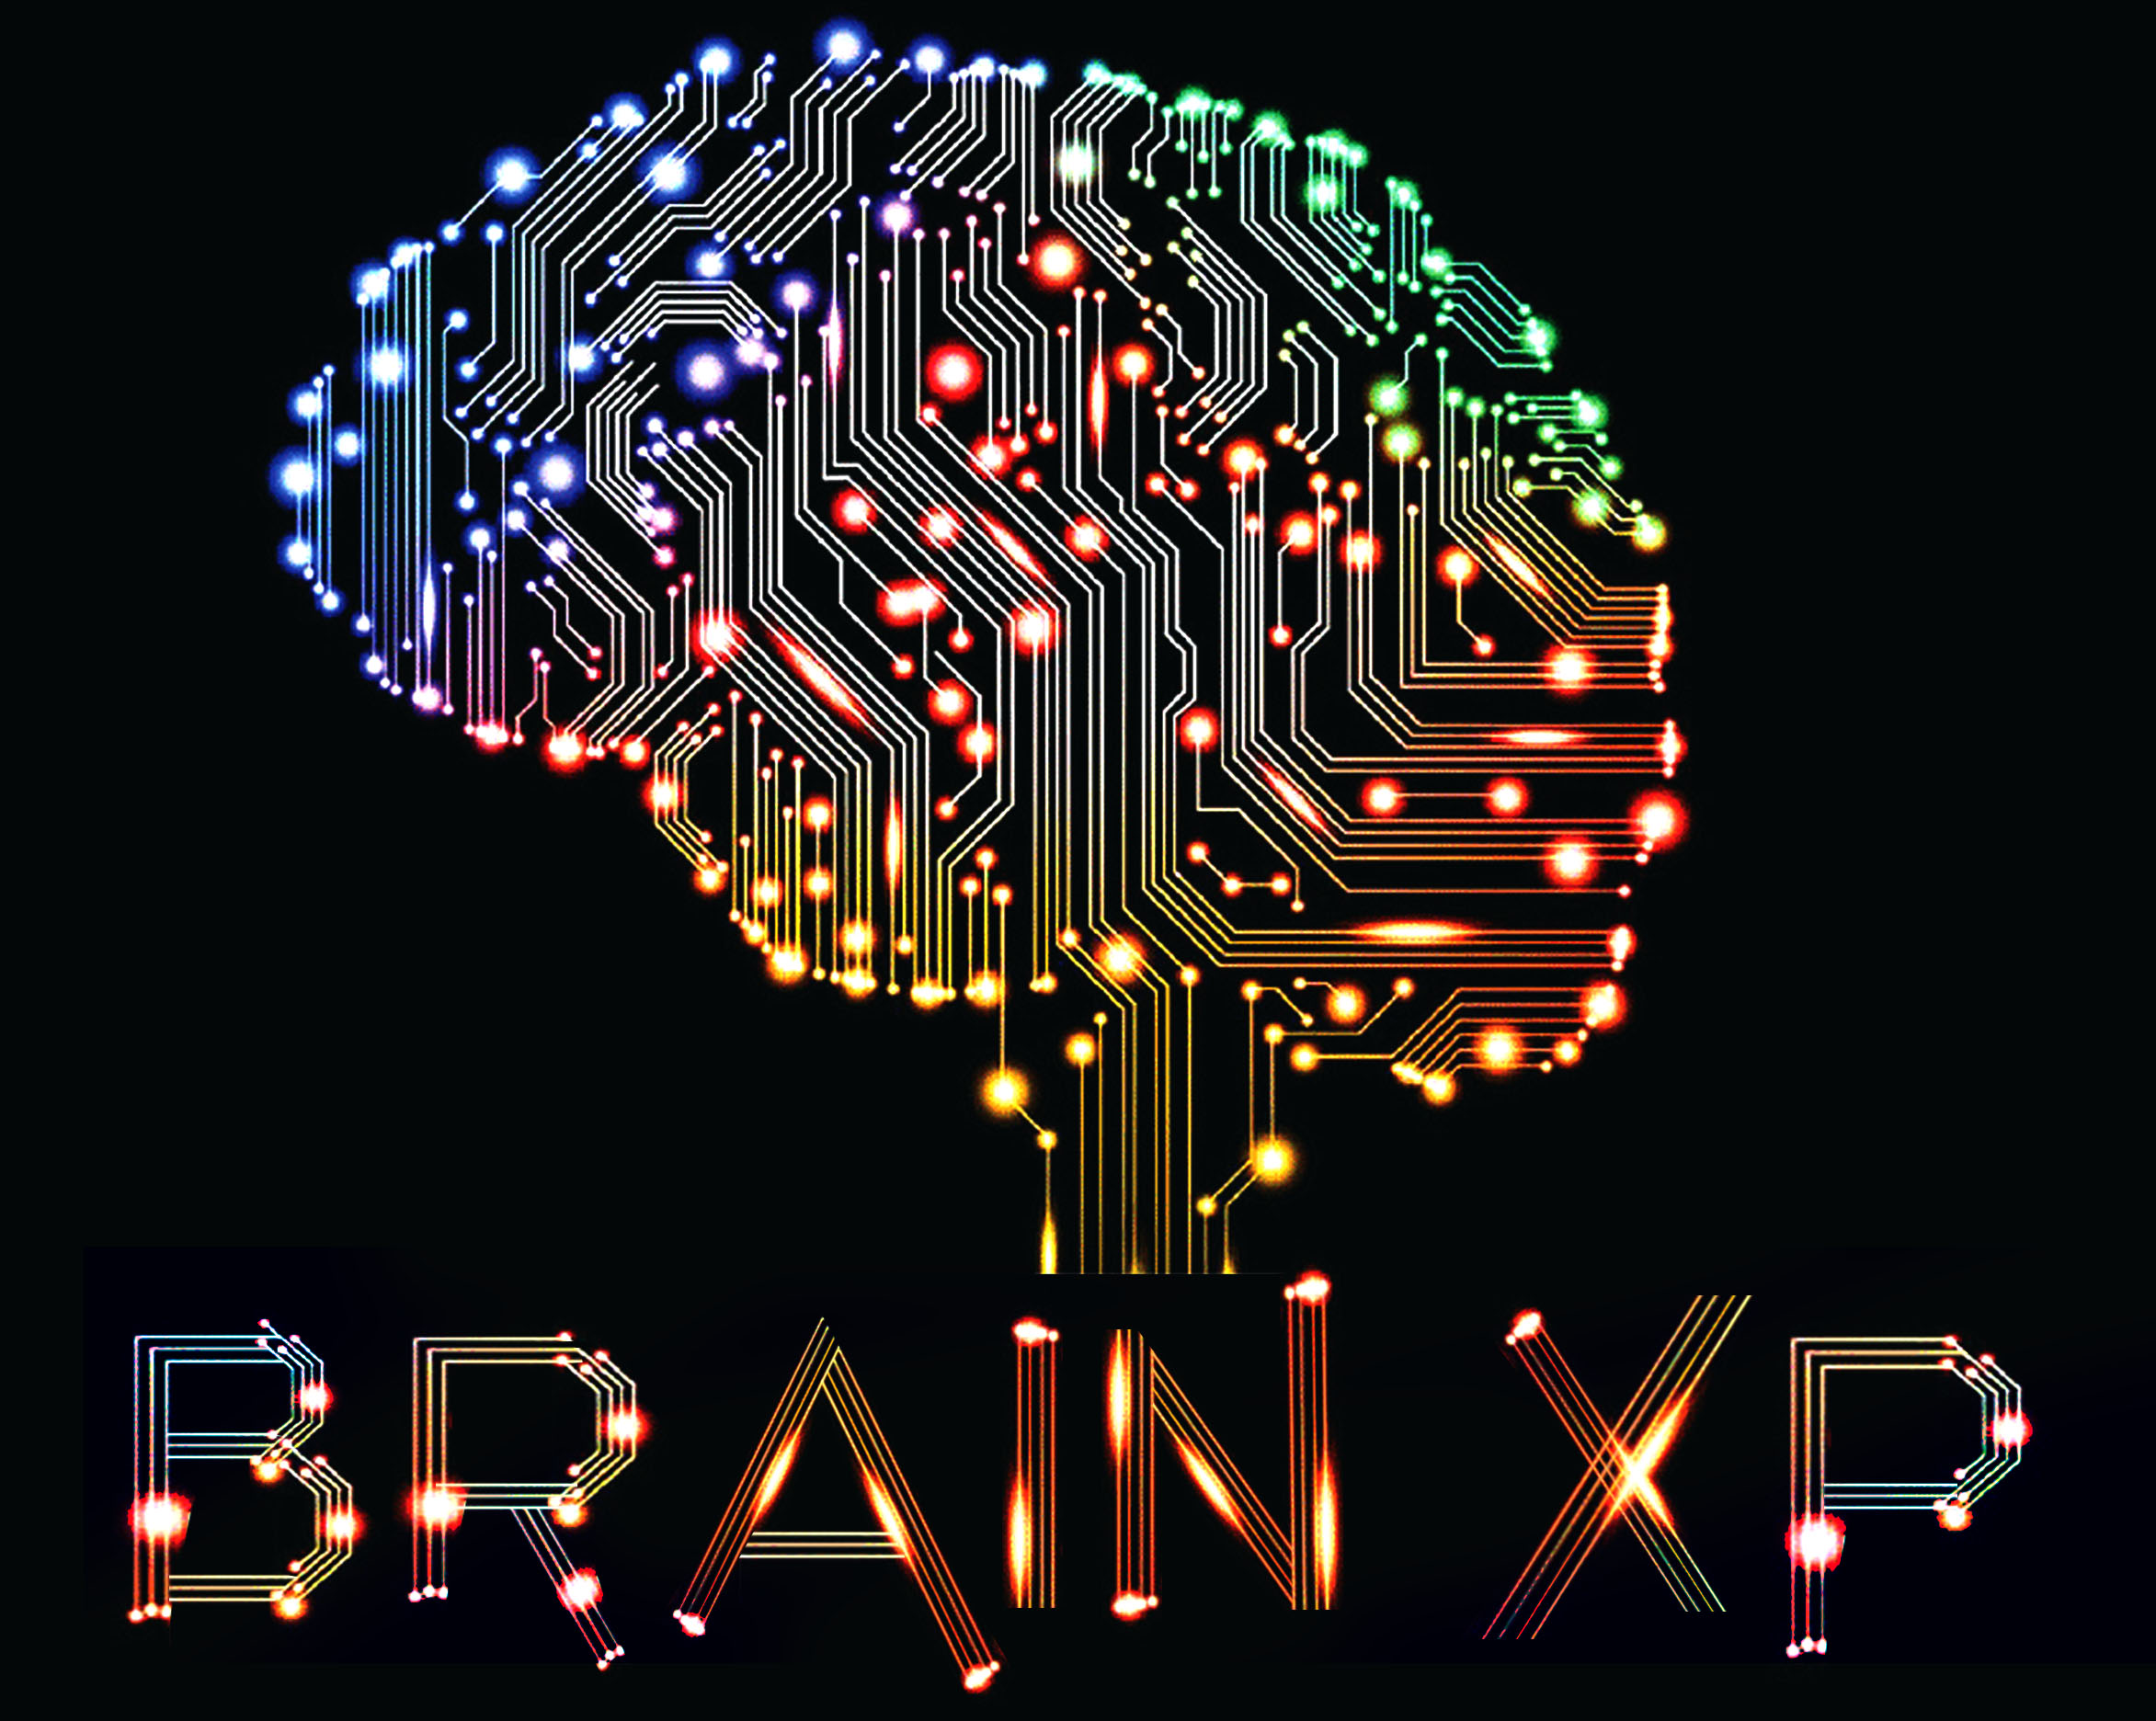 A multi-colored lit up brain with the words "Brain XP" underneath it